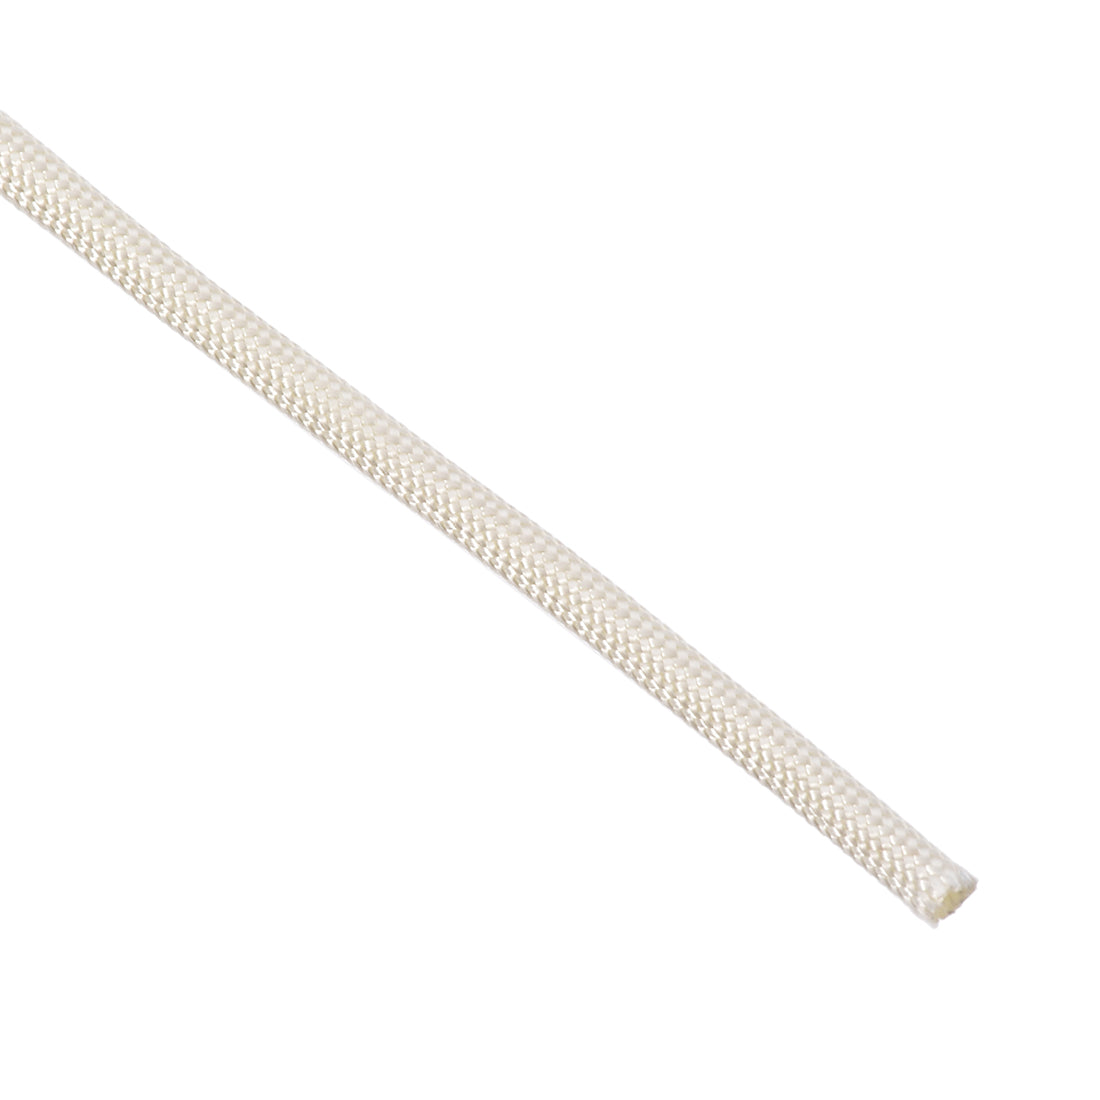 uxcell Uxcell Insulation Cable Protector, 9.8Ft-2.5mm High TEMP Fiberglass Sleeve White